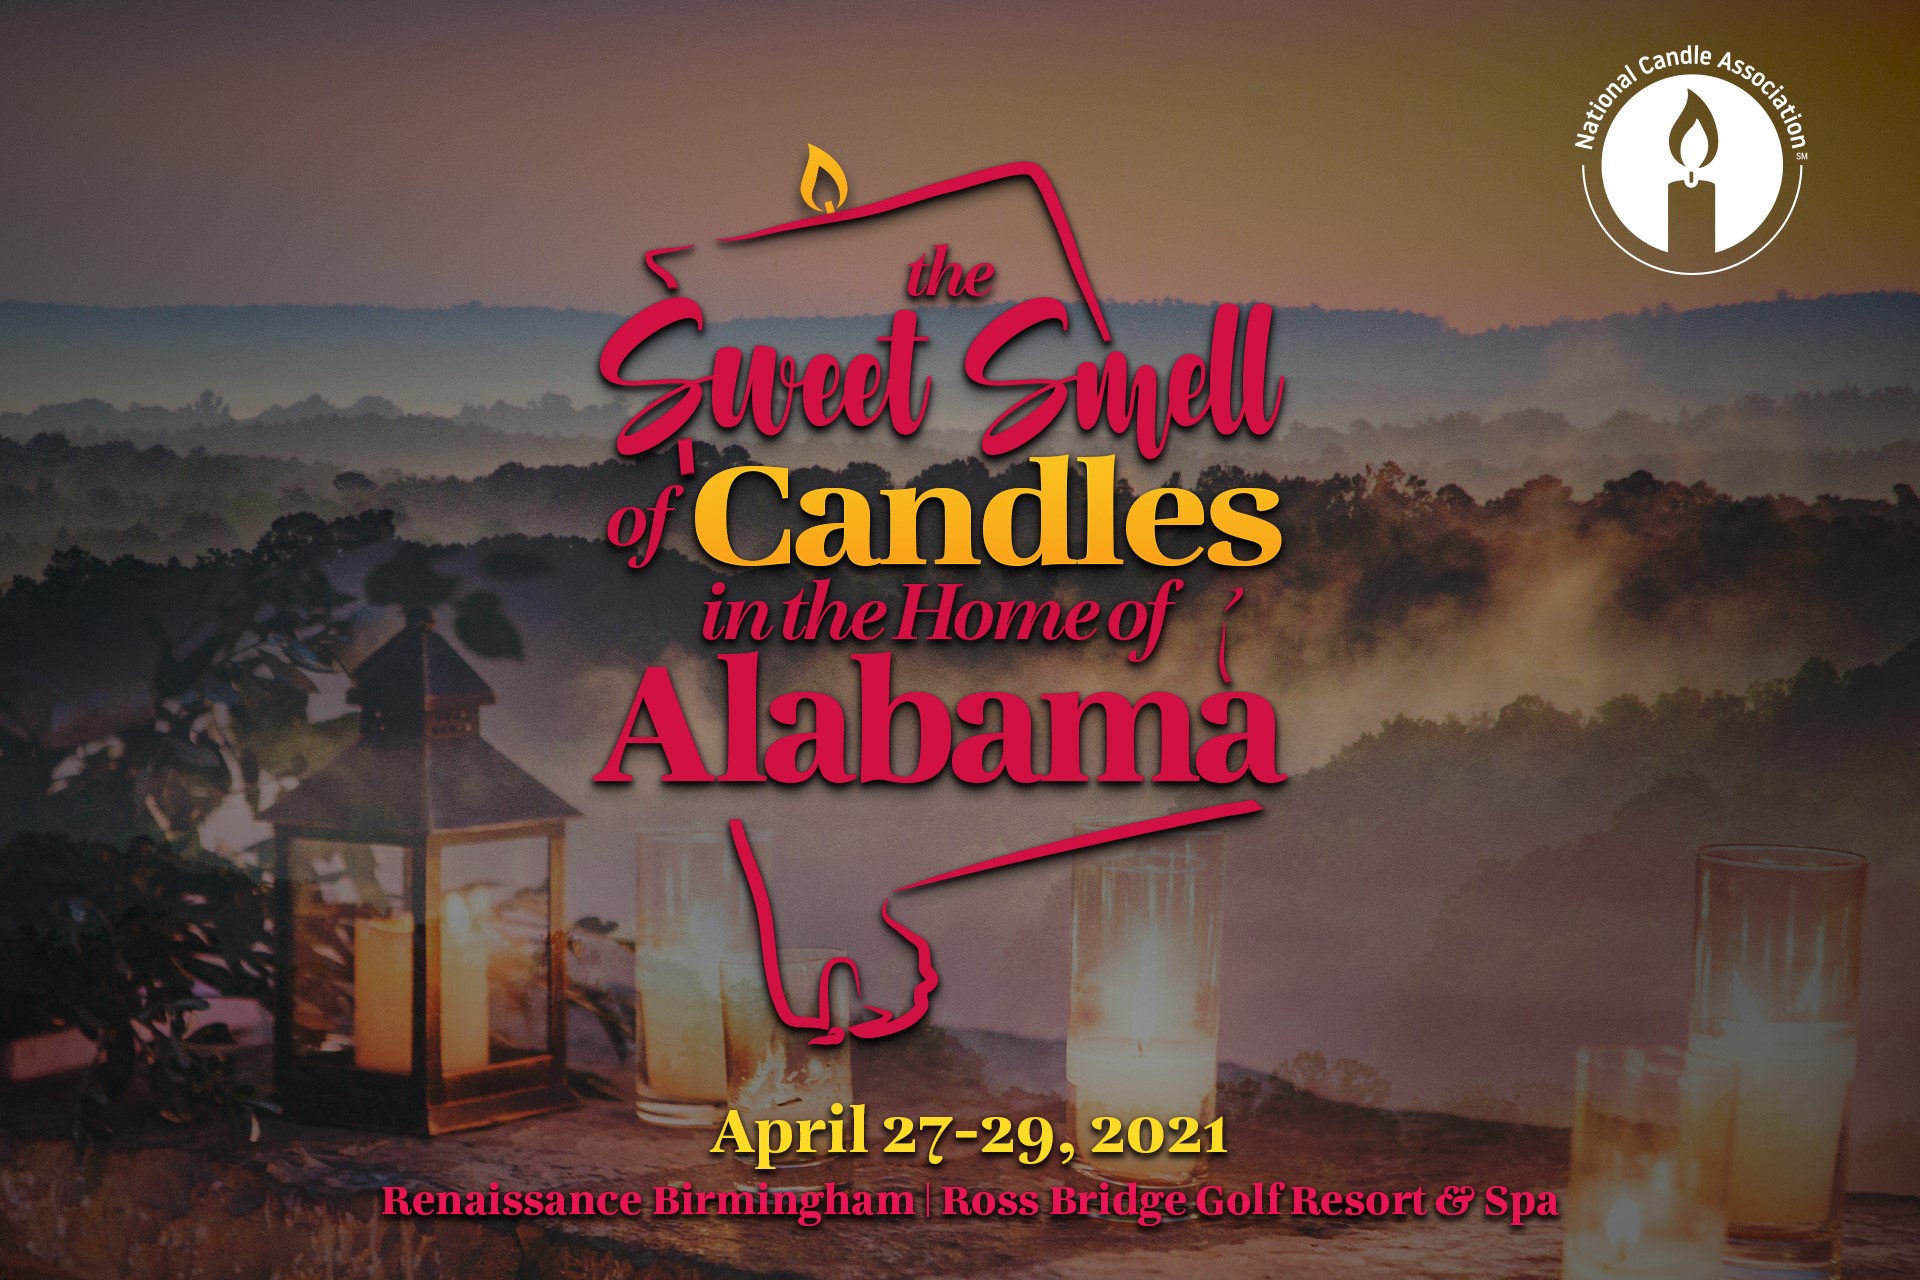 2021 NCA ANNUAL CONFERENCE & EXPO National Candle Association